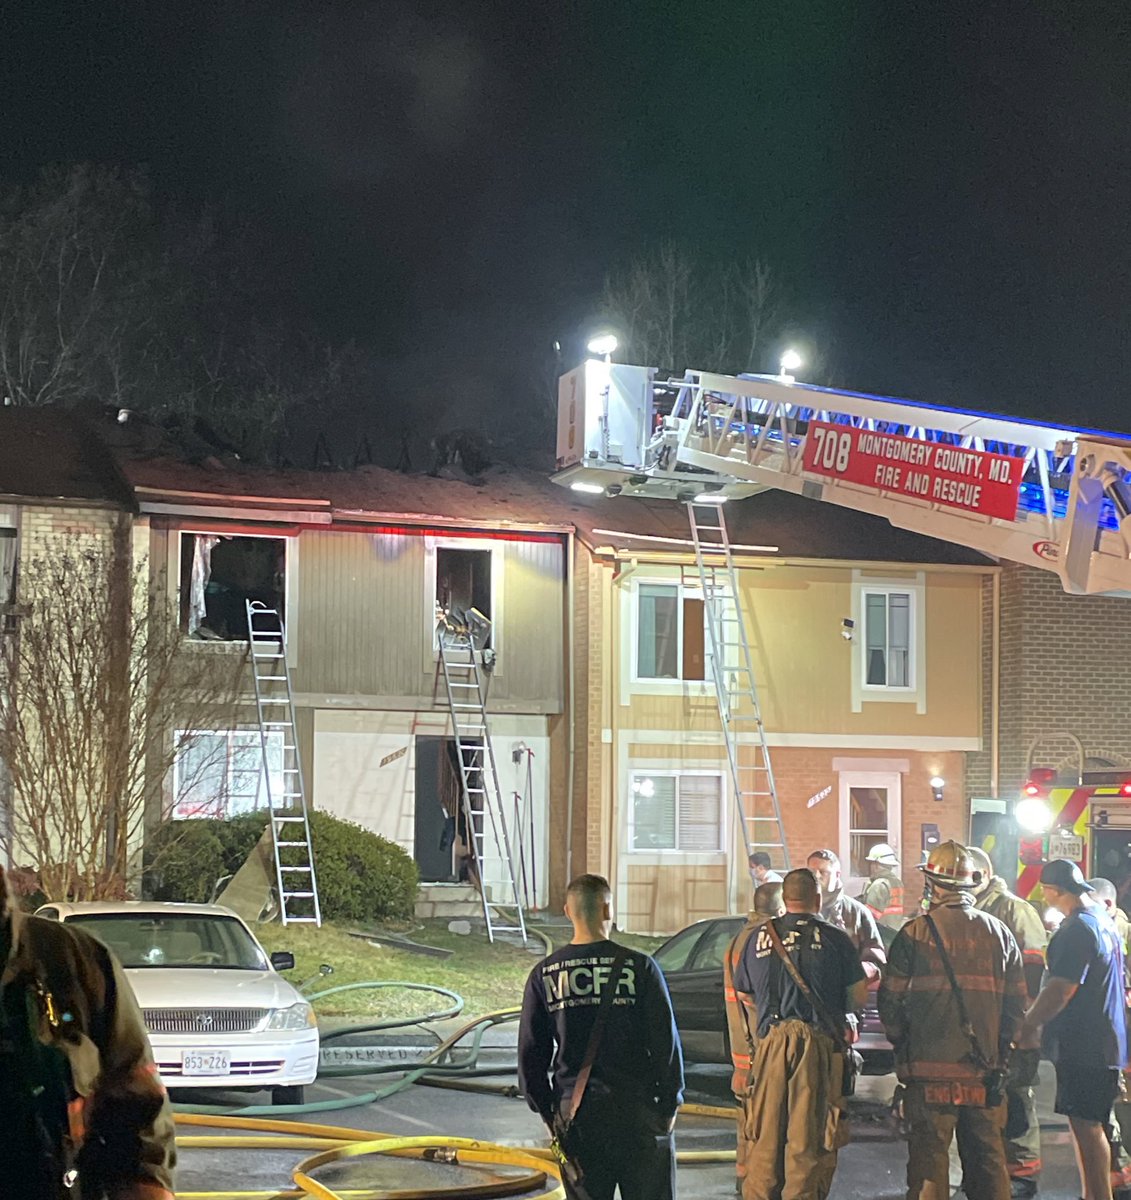 19600blk Club Lake Rd, Gburg; MOR TH; fire likely originated in 2nd floor bedroom; occupants got out; no injuries; Cause, under investigation; Damage estimated ~$325K; Displaced, 3 adults, 1 cat missing; ~80 @mcfrs FFs responded; RedCross assisting